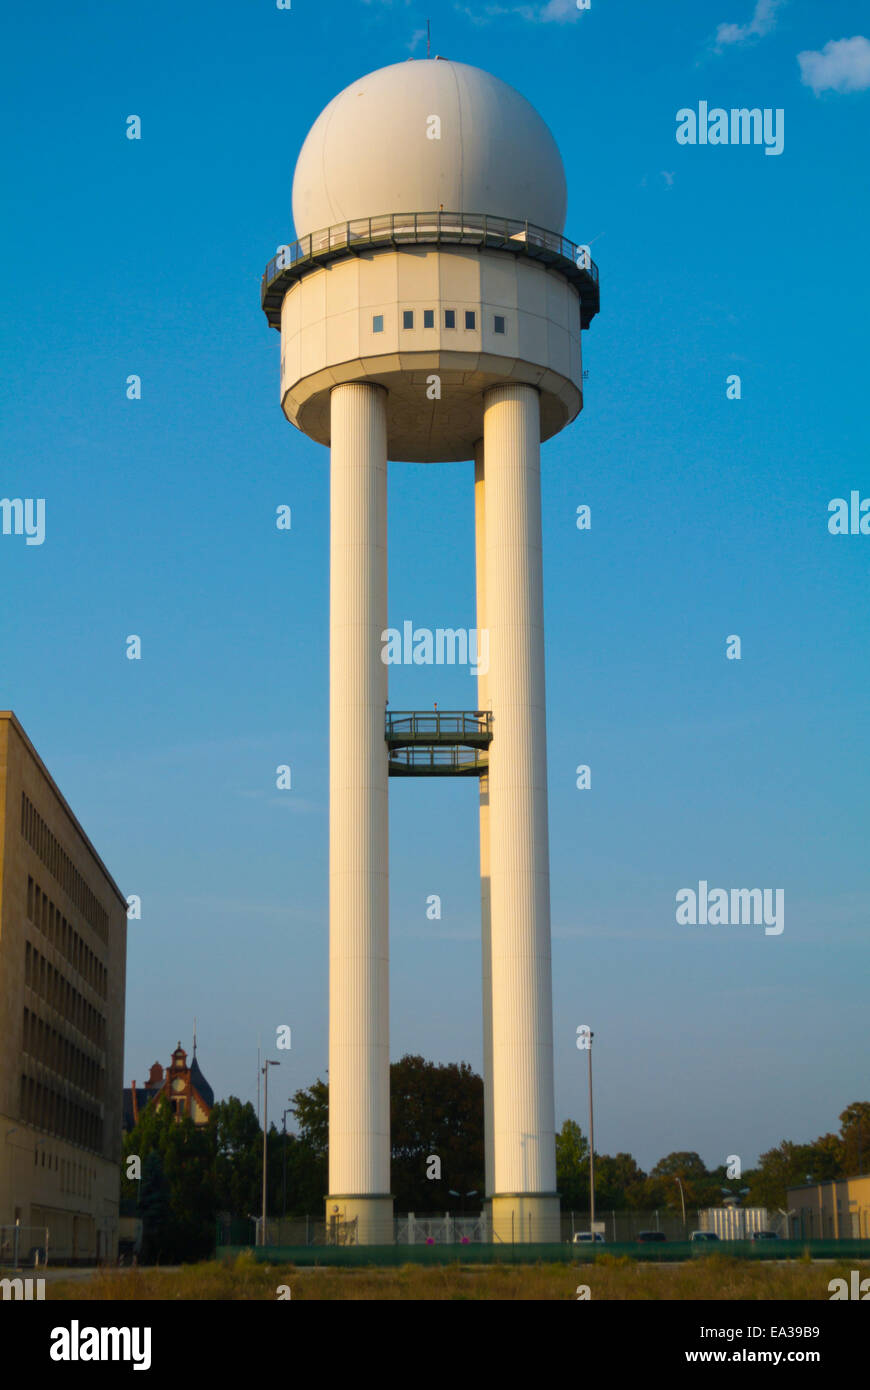 Air control tower, Tempelhof former airport, west Berlin, Germany Stock Photo